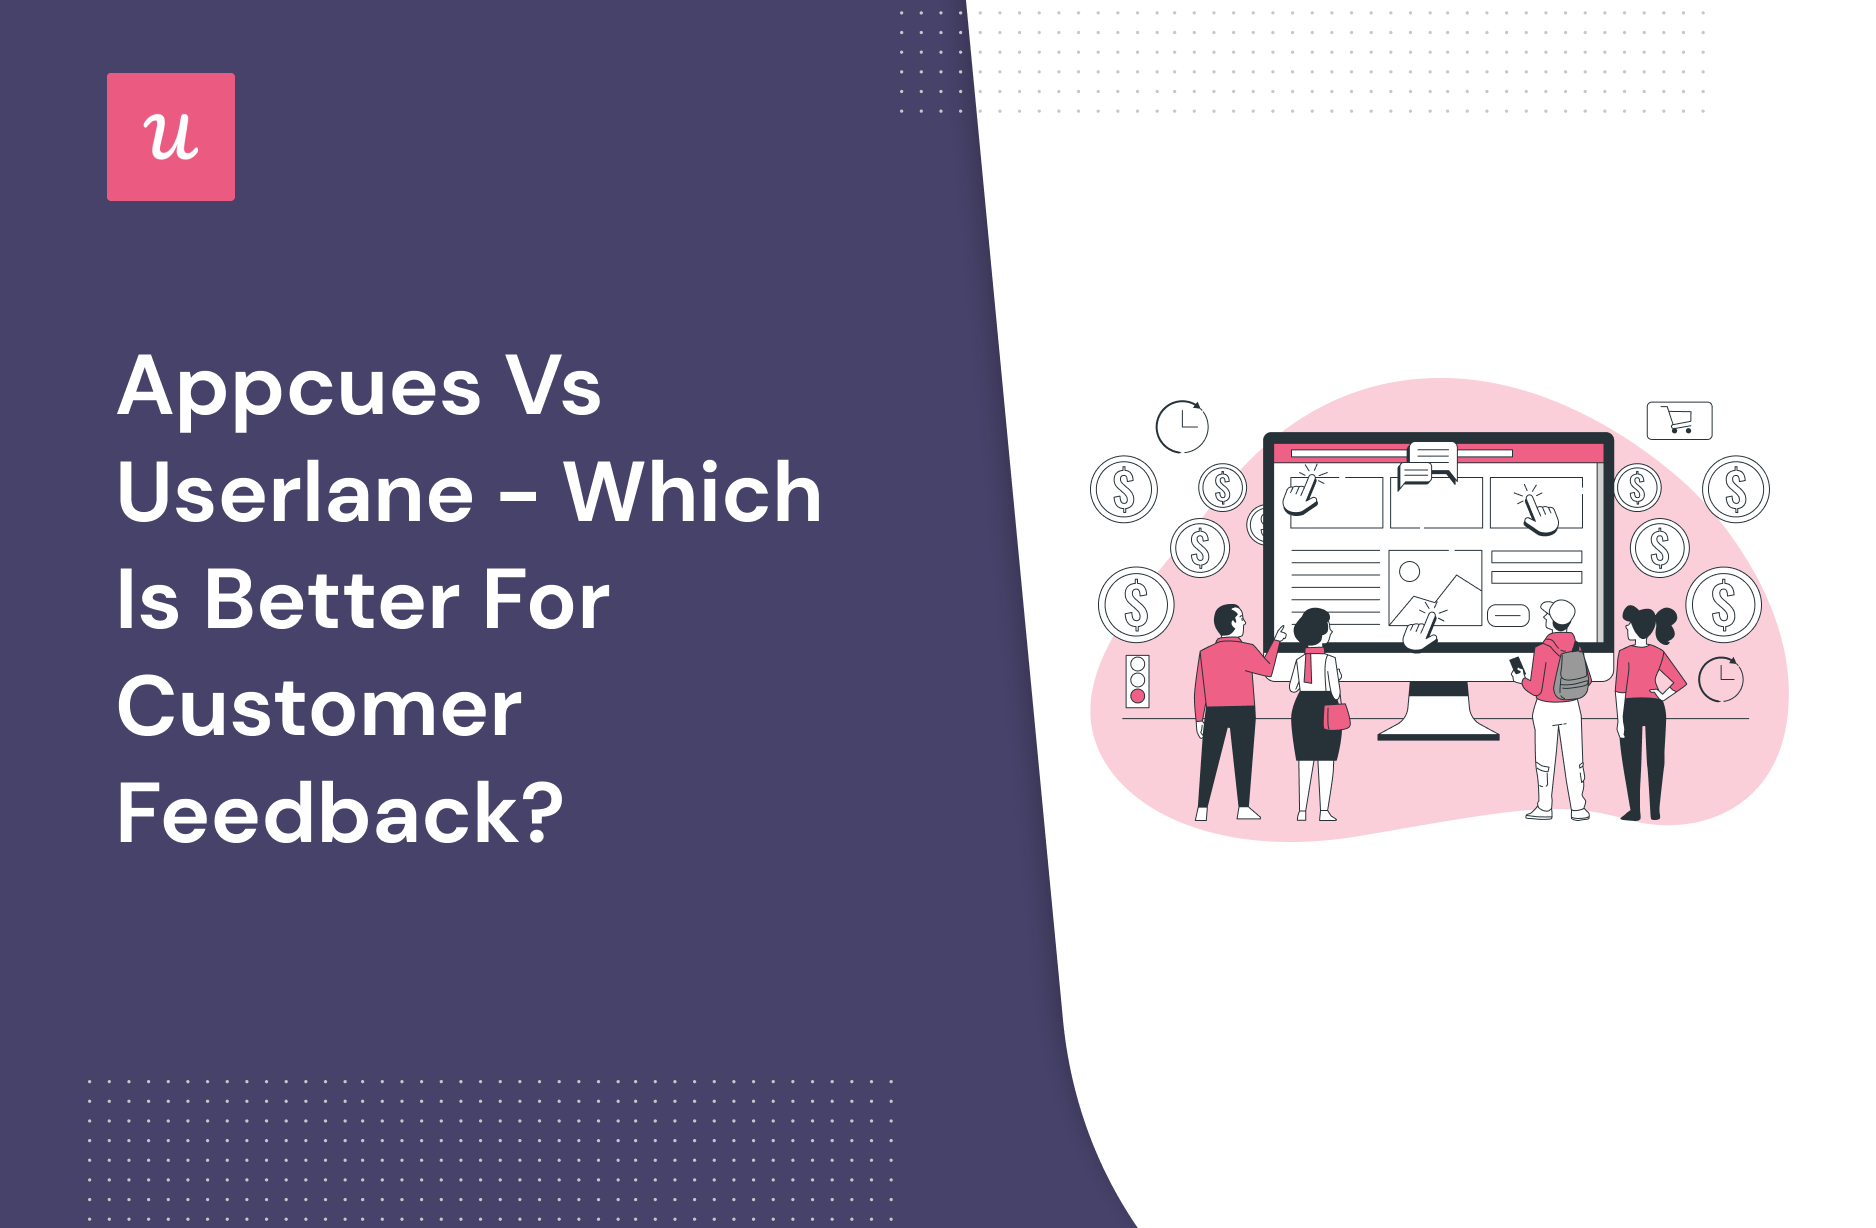 Appcues vs Userlane - which is better for Customer Feedback